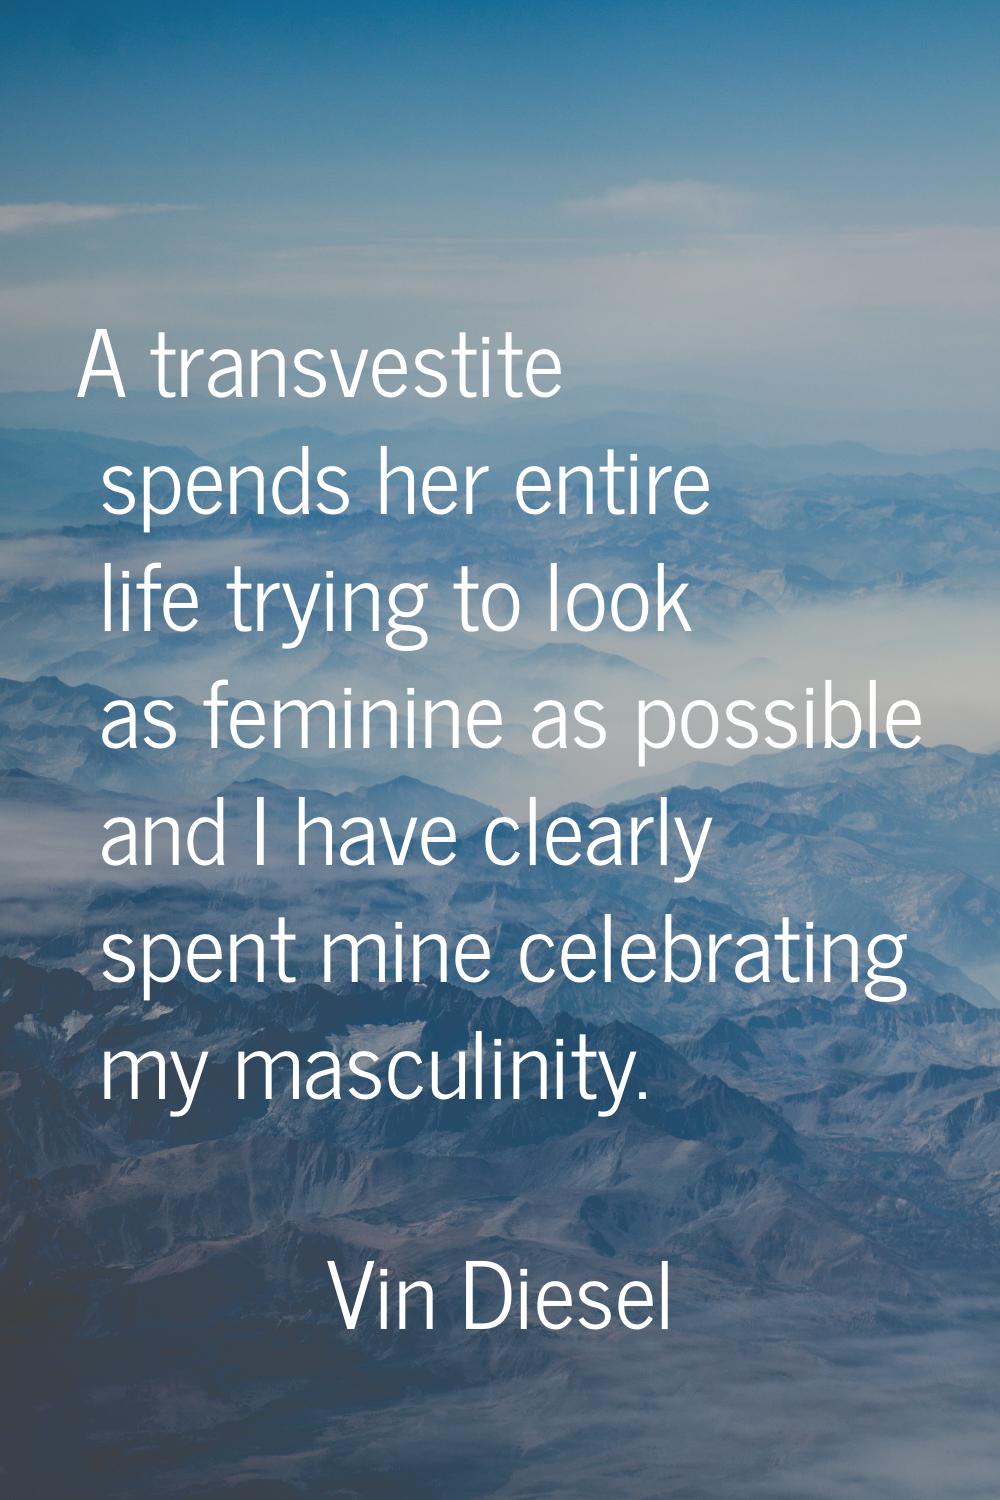 A transvestite spends her entire life trying to look as feminine as possible and I have clearly spe